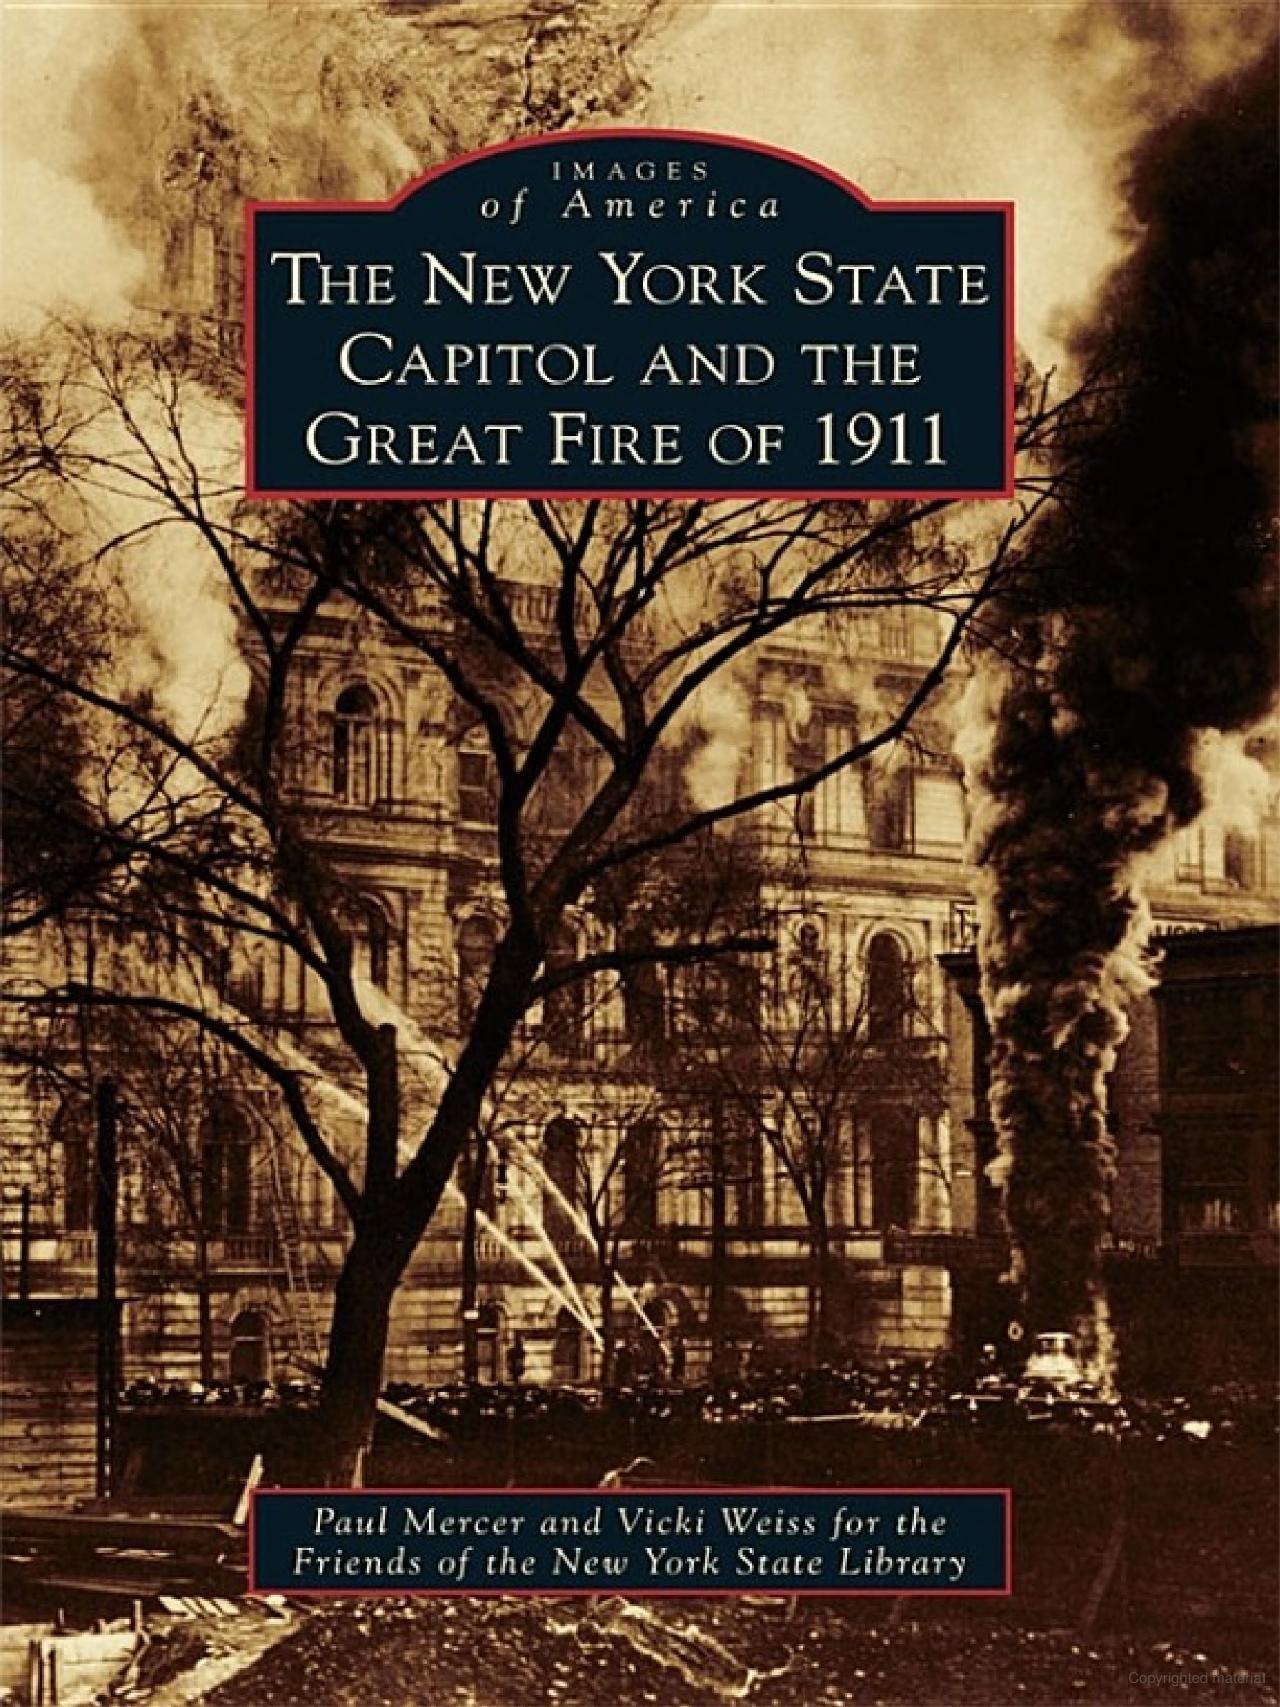 Photograph of the Capitol building on fire in 1911.